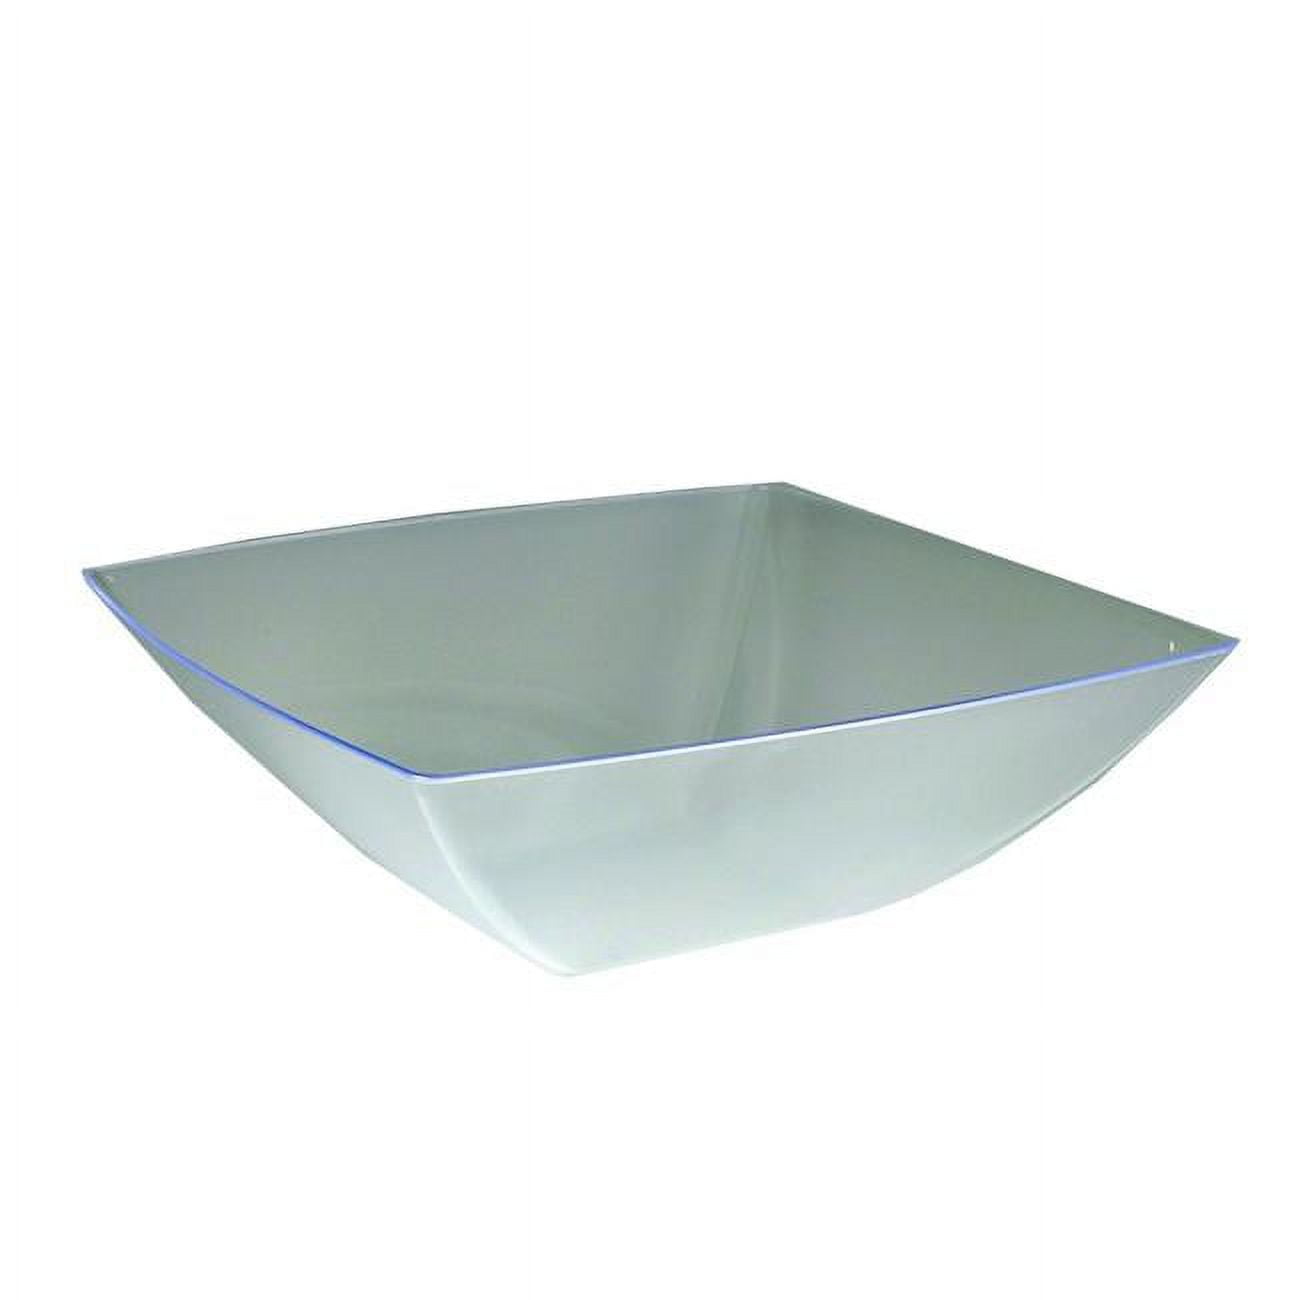 Sq81286 Pe 128 Oz Simply Squared Presentation Bowl, Clear - Case Of 12